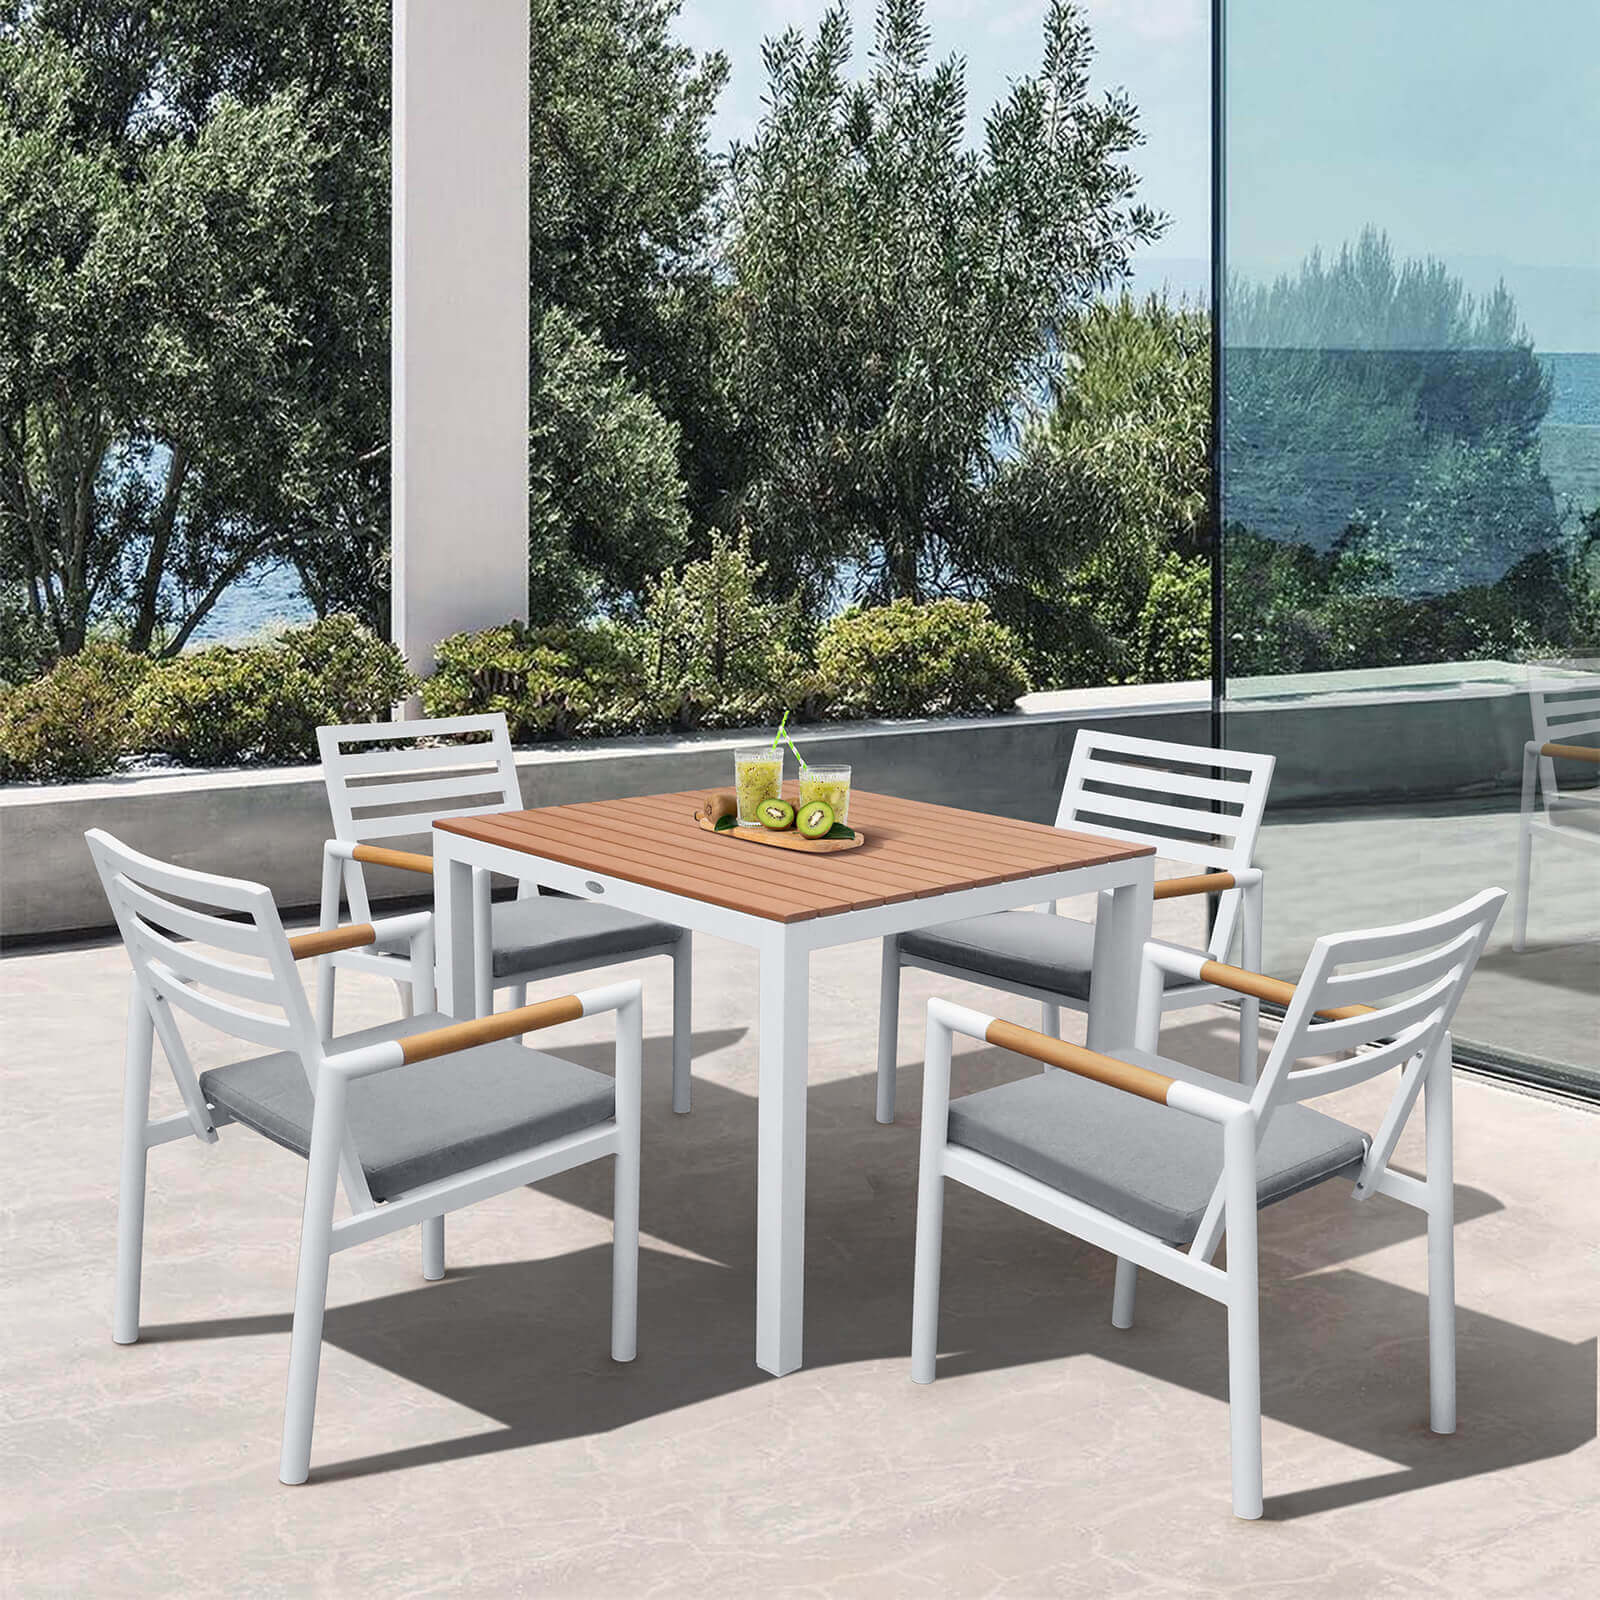 Patio Aluminum Dining Chairs Set of 2, Armchair with Cushion for Outdoor, Indoor